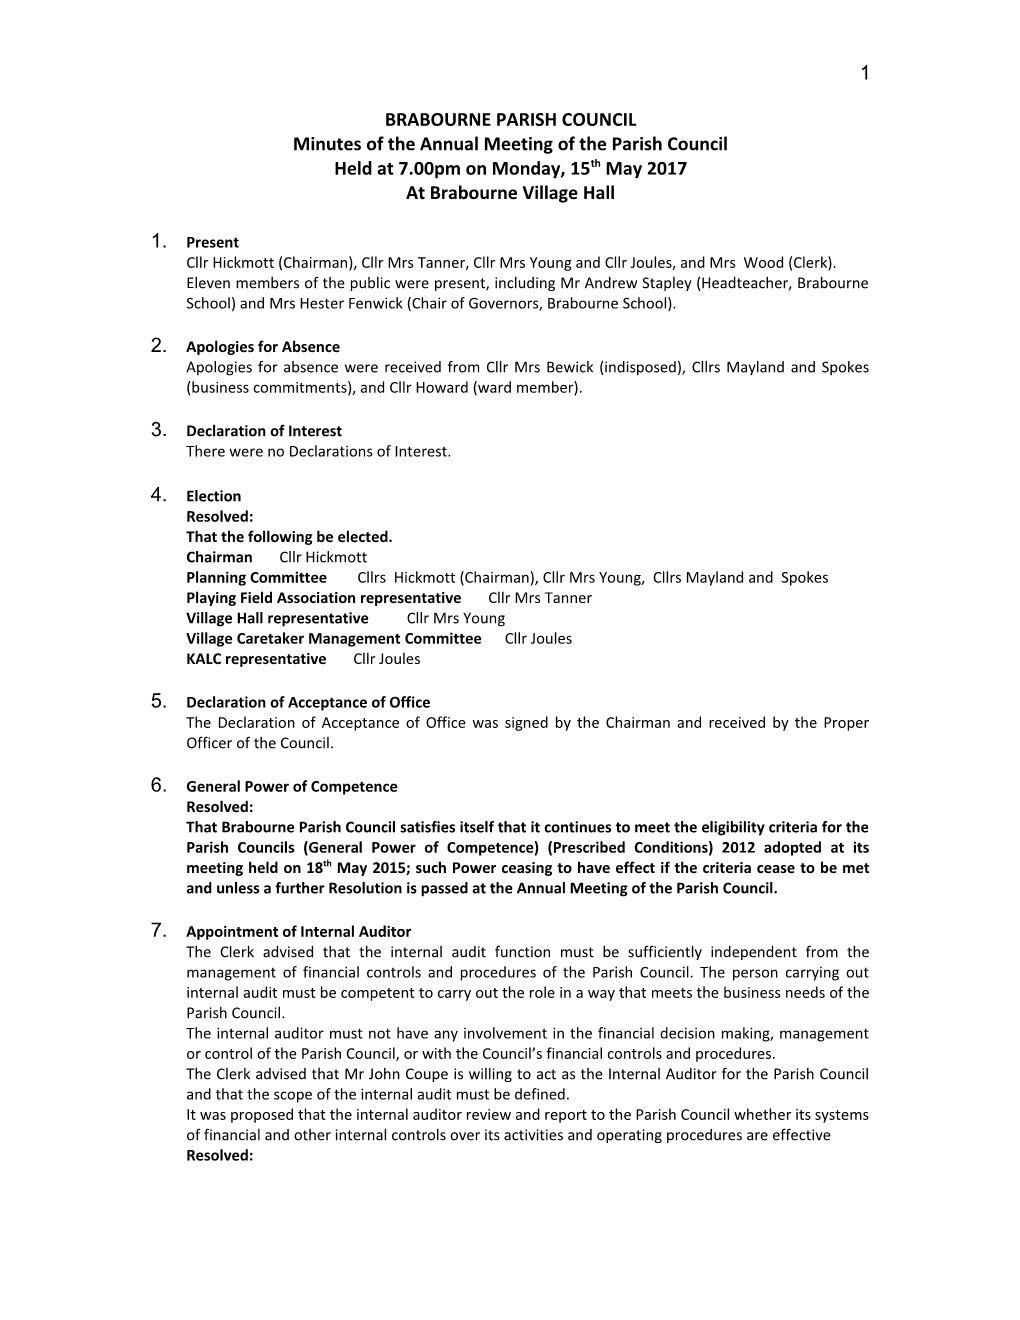 BRABOURNE PARISH COUNCIL Minutes of the Annual Meeting of the Parish Council